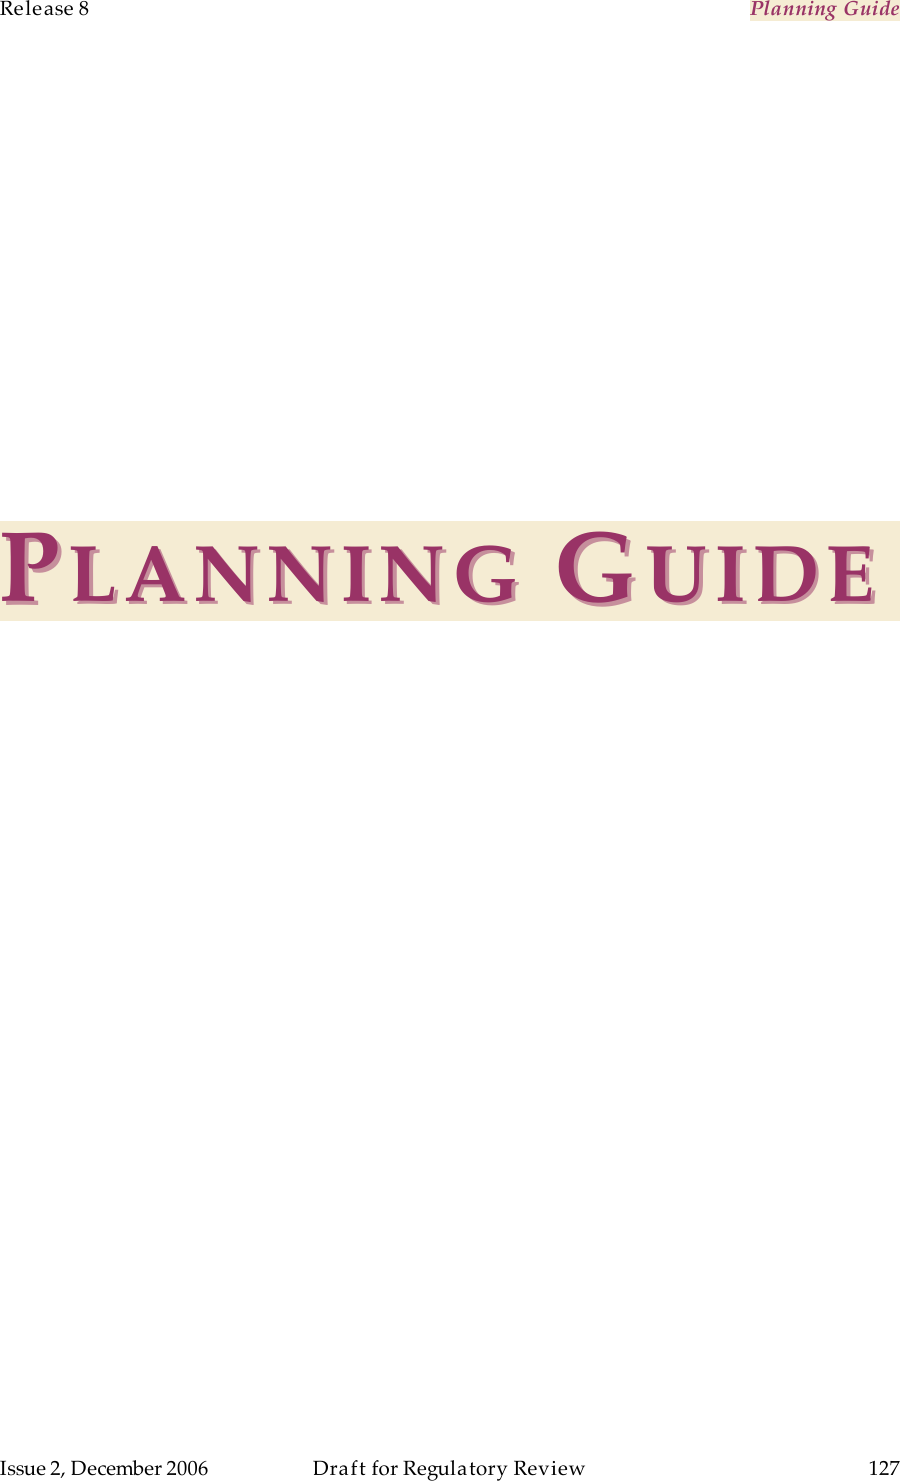 Release 8    Planning Guide                  March 200                  Through Software Release 6.   Issue 2, December 2006  Draft for Regulatory Review  127     PPLANNING LANNING  GGUIDEUIDE   